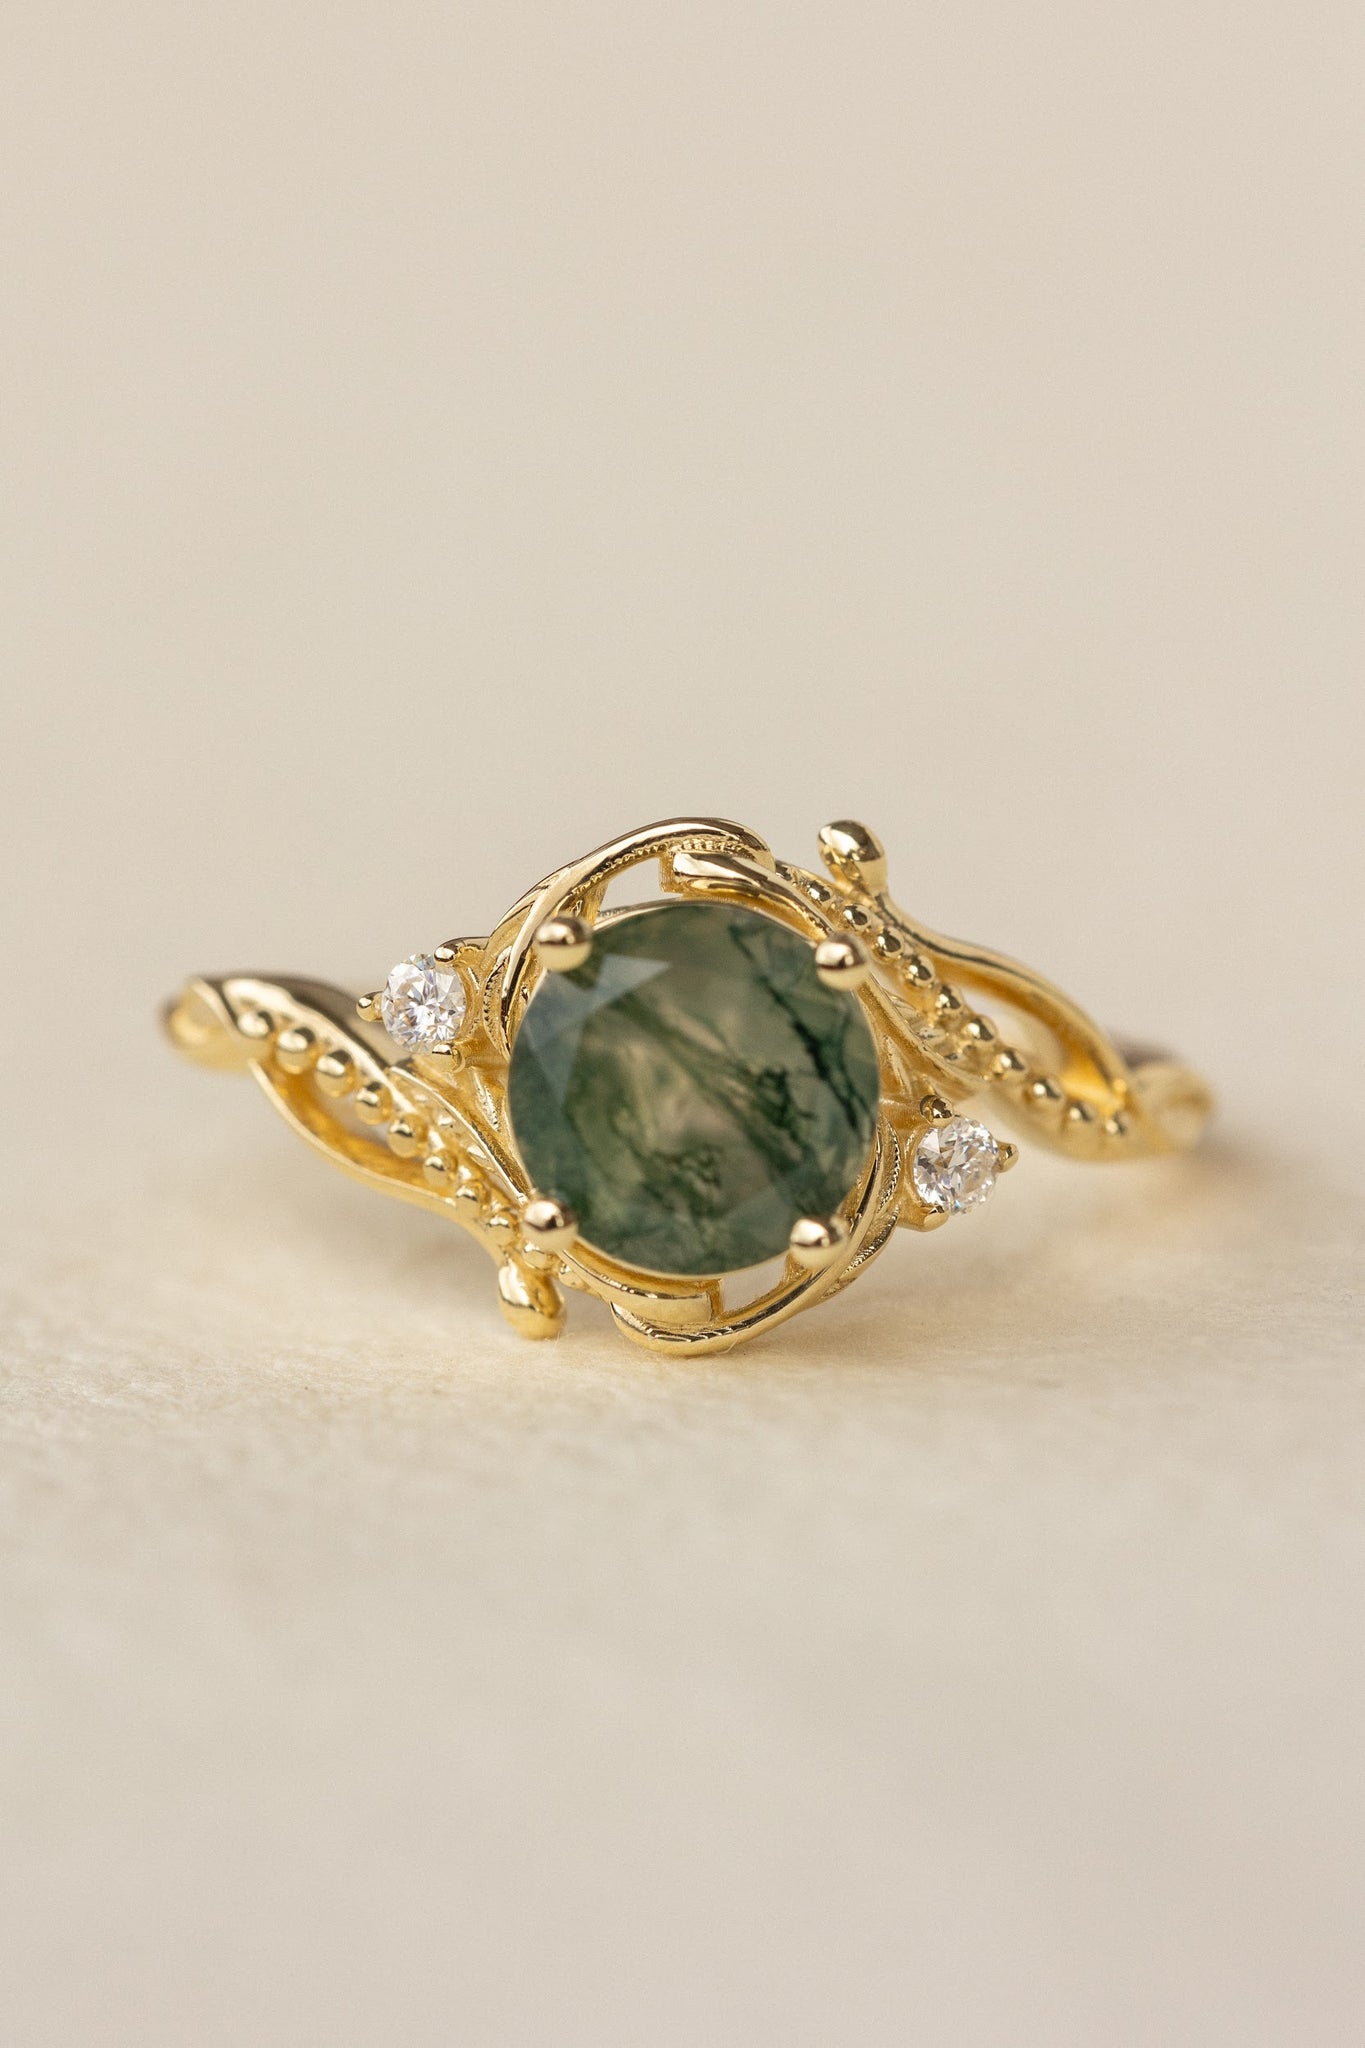 Round moss agate engagement ring with accent diamonds, nature themed proposal ring with diamonds  / Undina - Eden Garden Jewelry™